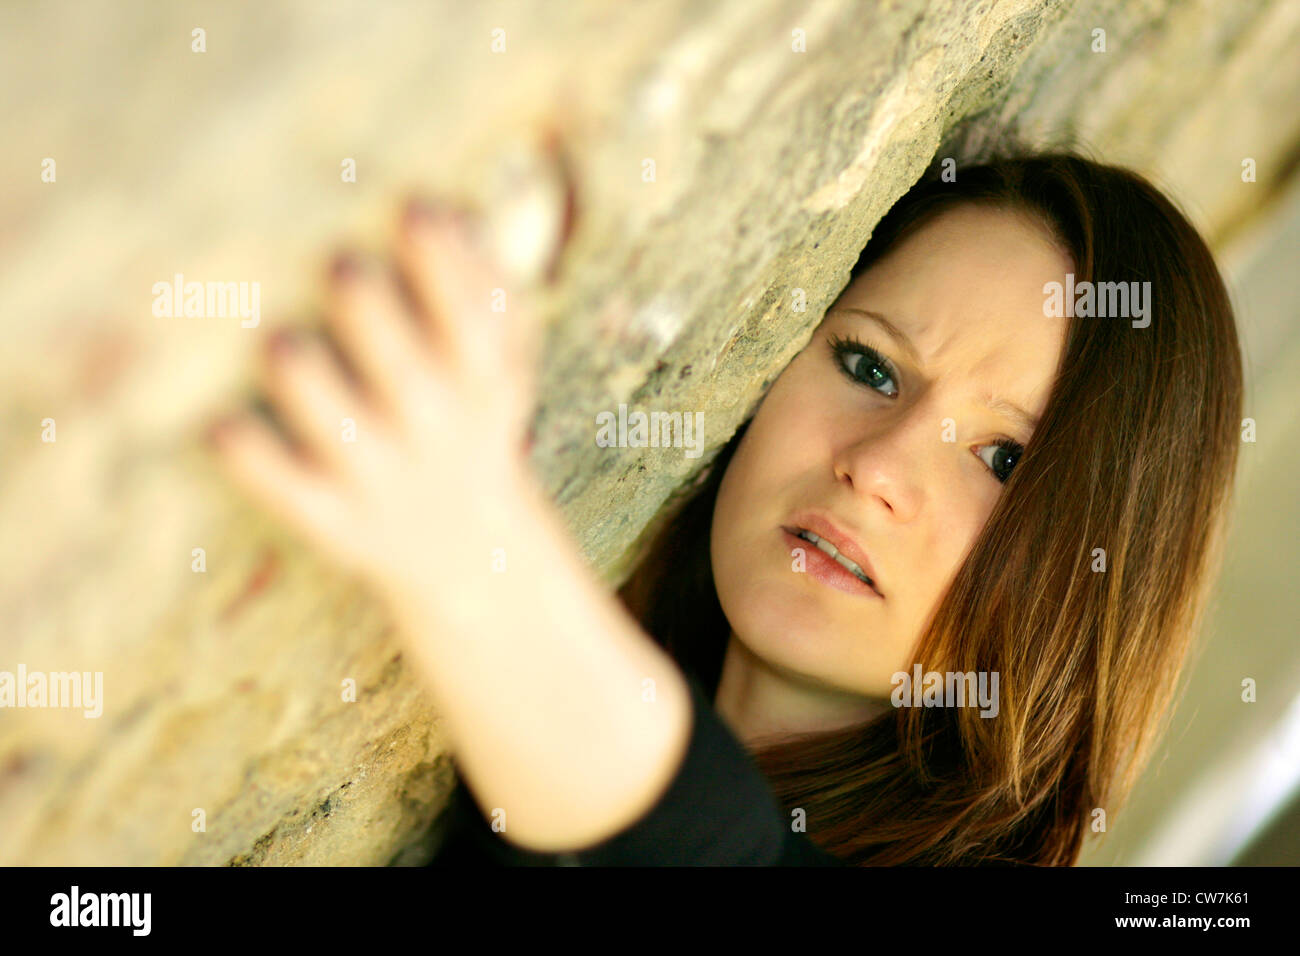 young woman with long brown hair leaning against a wall Stock Photo